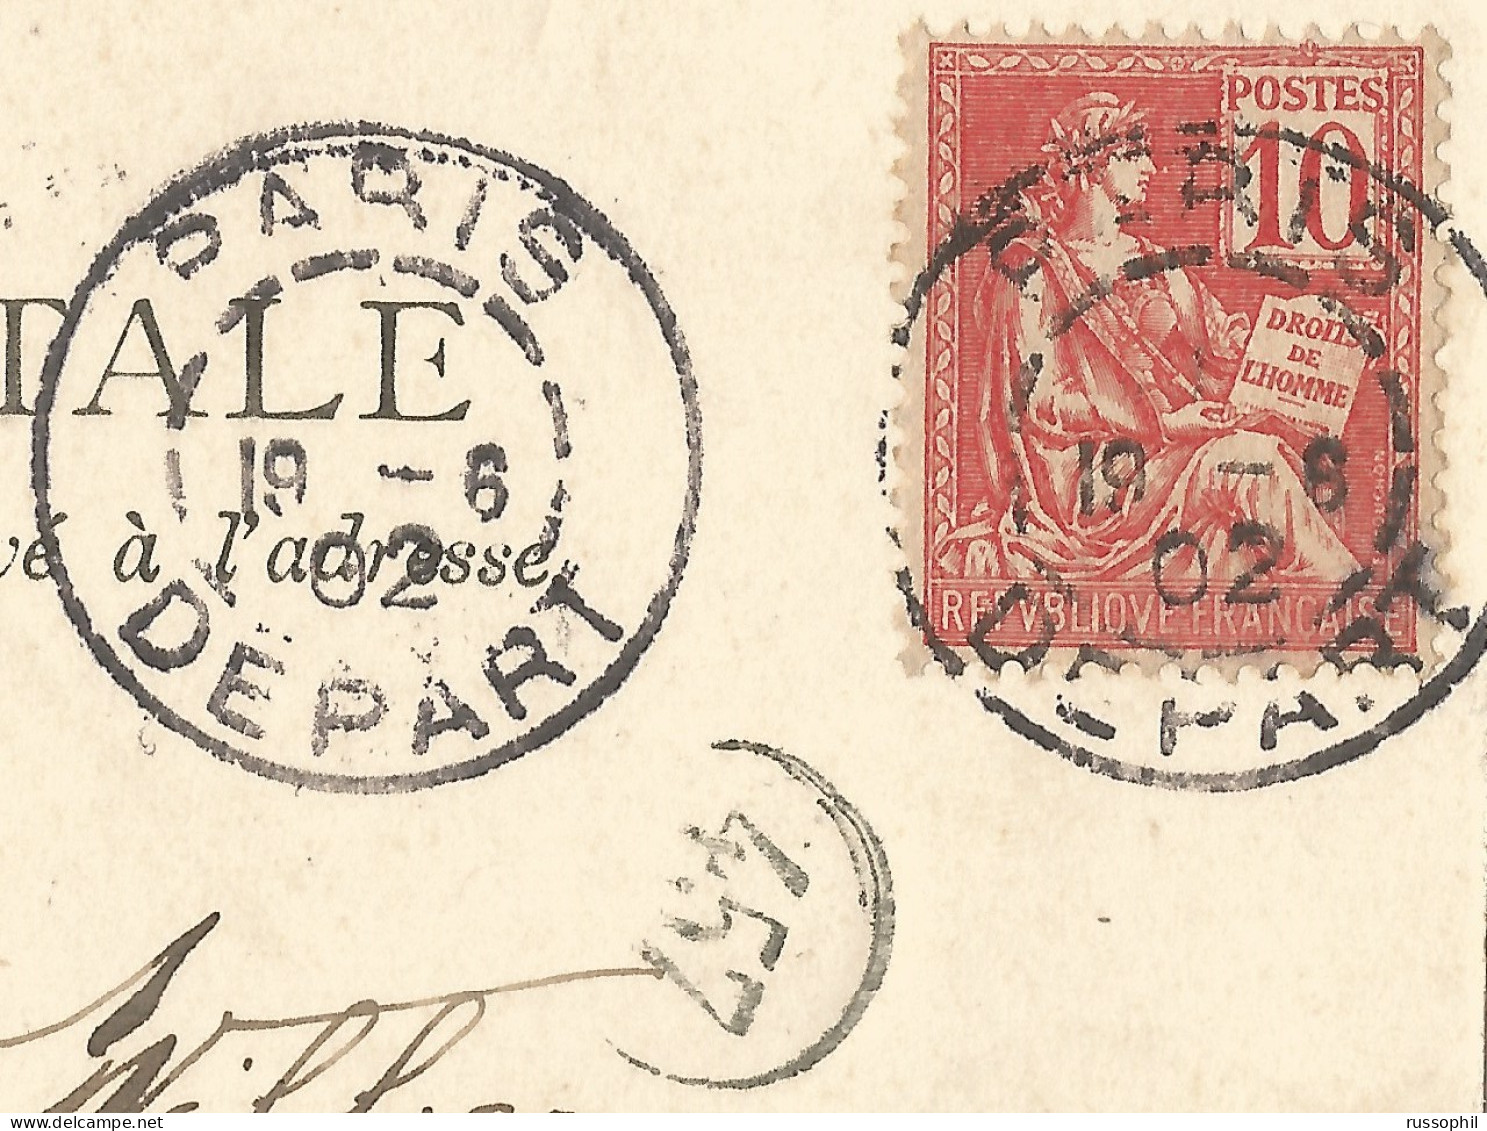 FRANCE - VARIETY &  CURIOSITY - 75 - A3 DEPARTURE CDSs "PARIS DEPART"  ON PC - HOUR MISSING IN DATE BLOCK - 1902 - Covers & Documents